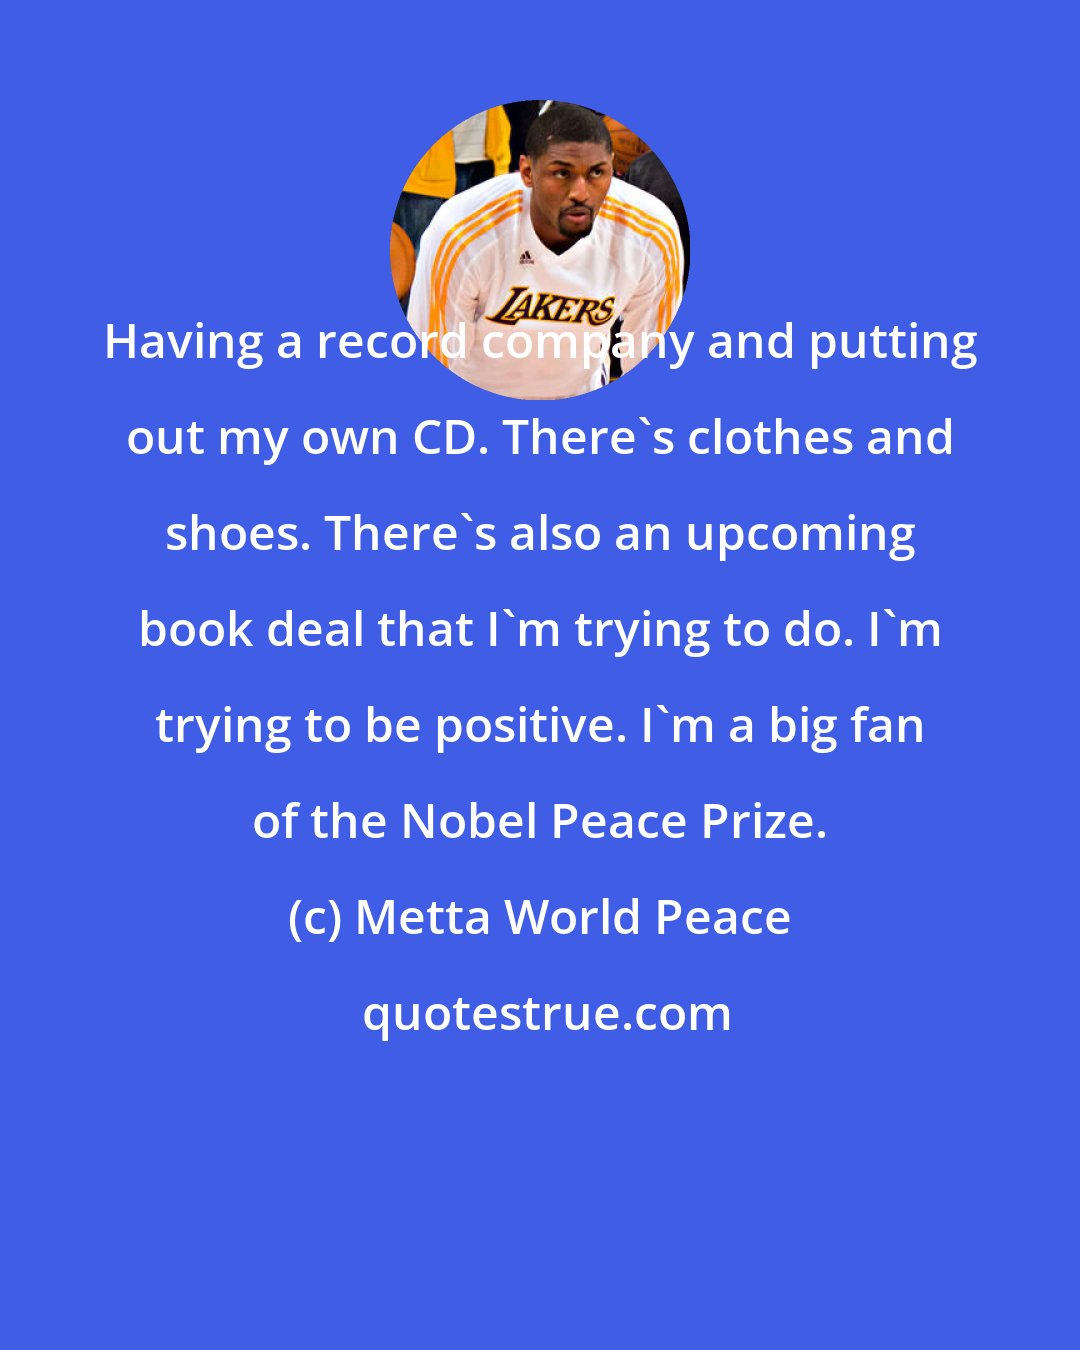 Metta World Peace: Having a record company and putting out my own CD. There's clothes and shoes. There's also an upcoming book deal that I'm trying to do. I'm trying to be positive. I'm a big fan of the Nobel Peace Prize.